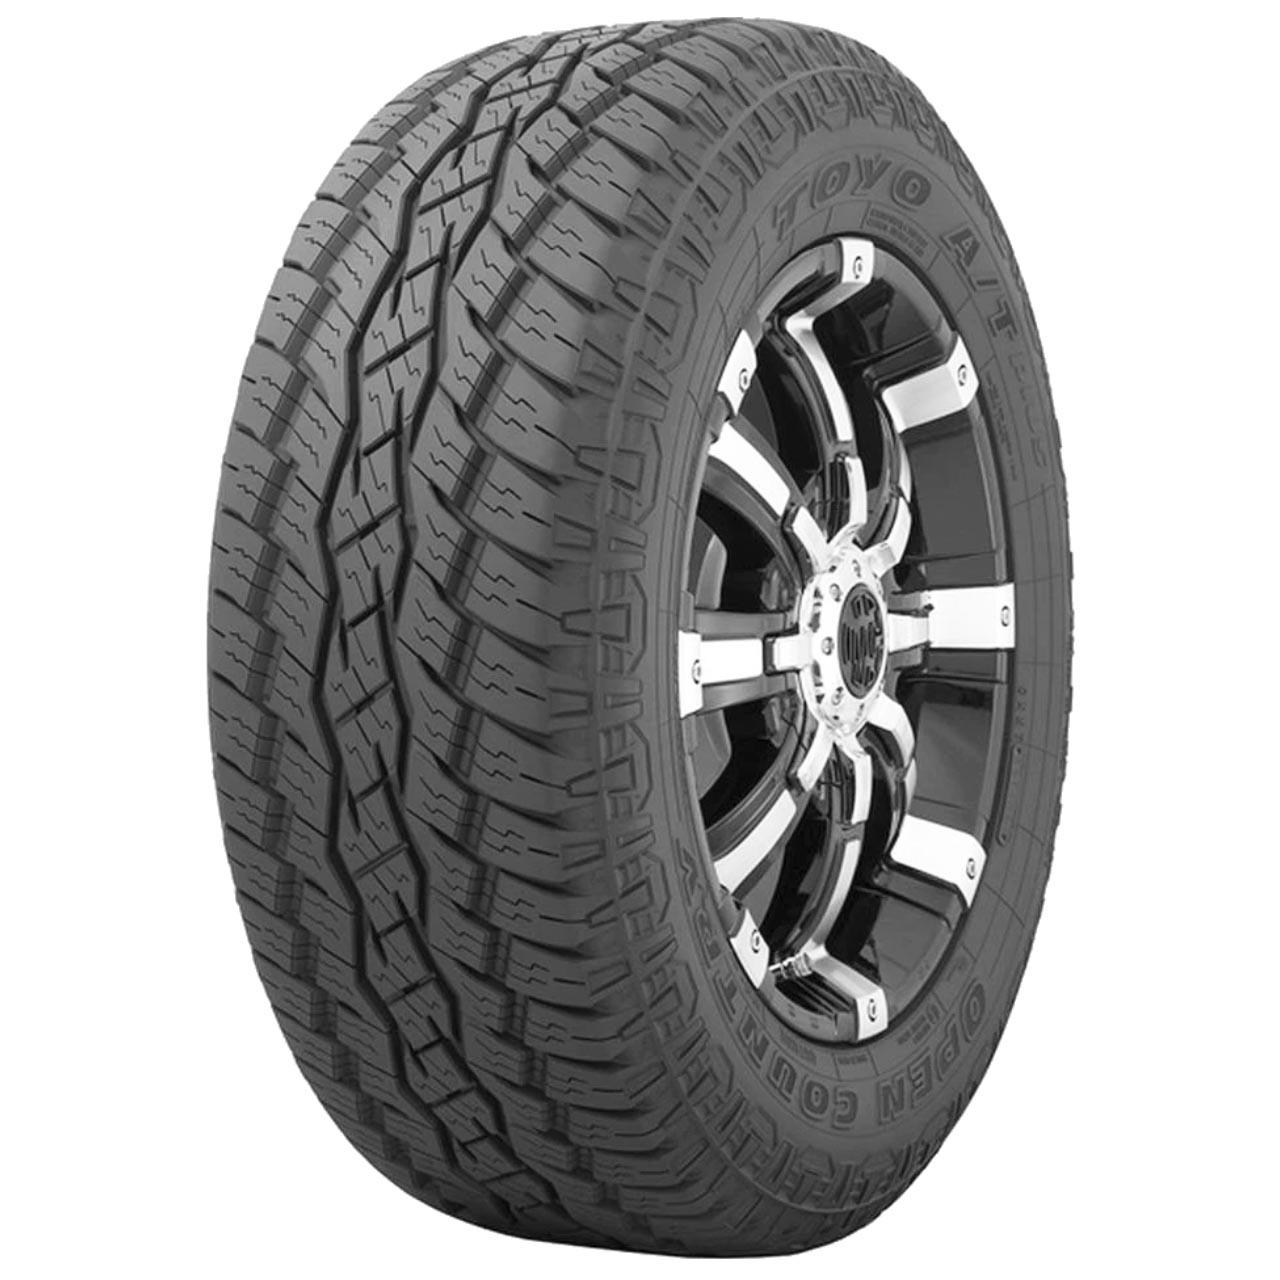 Toyo Open Country AT Plus 275/50R21 113H XL